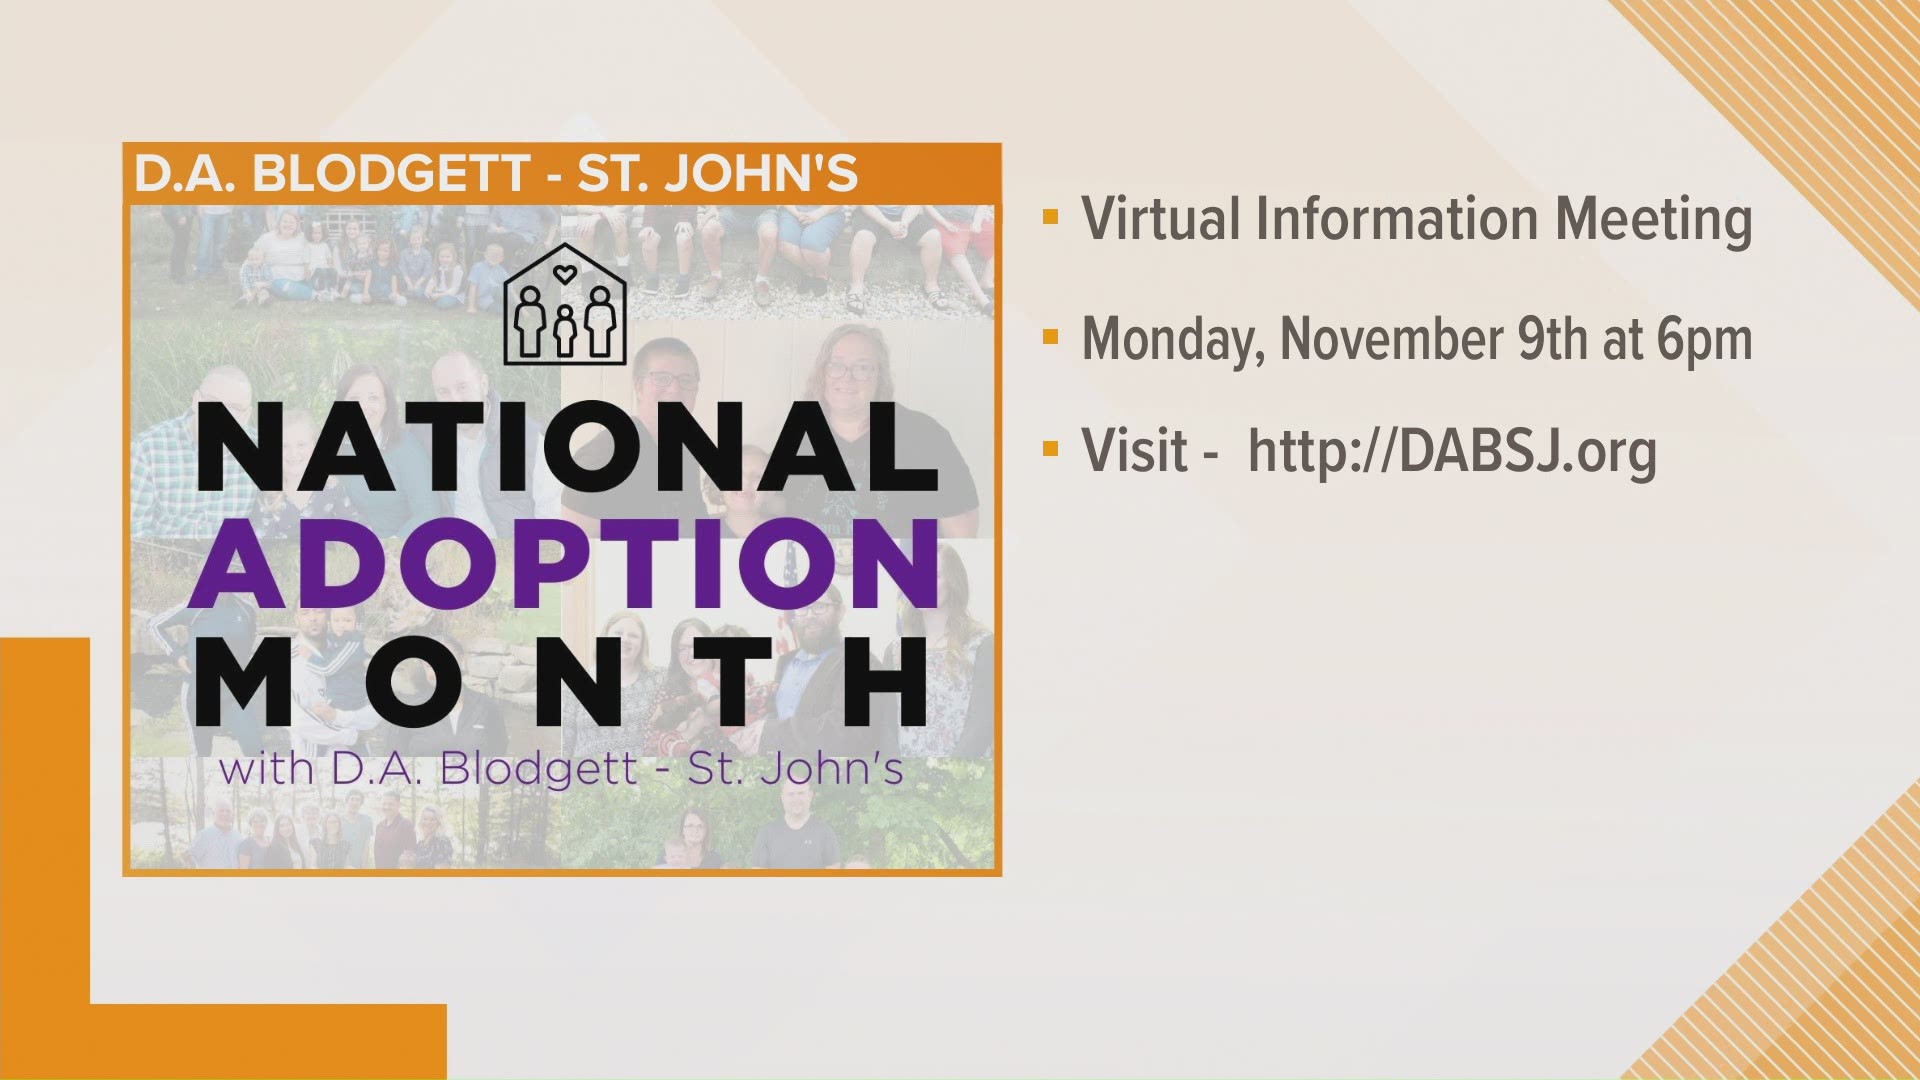 D.A. Blodgett - St. John's is hosting a foster care information meeting on Monday, Nov. 9 from 6 to 8 p.m. The meeting will be held virtually on Zoom.